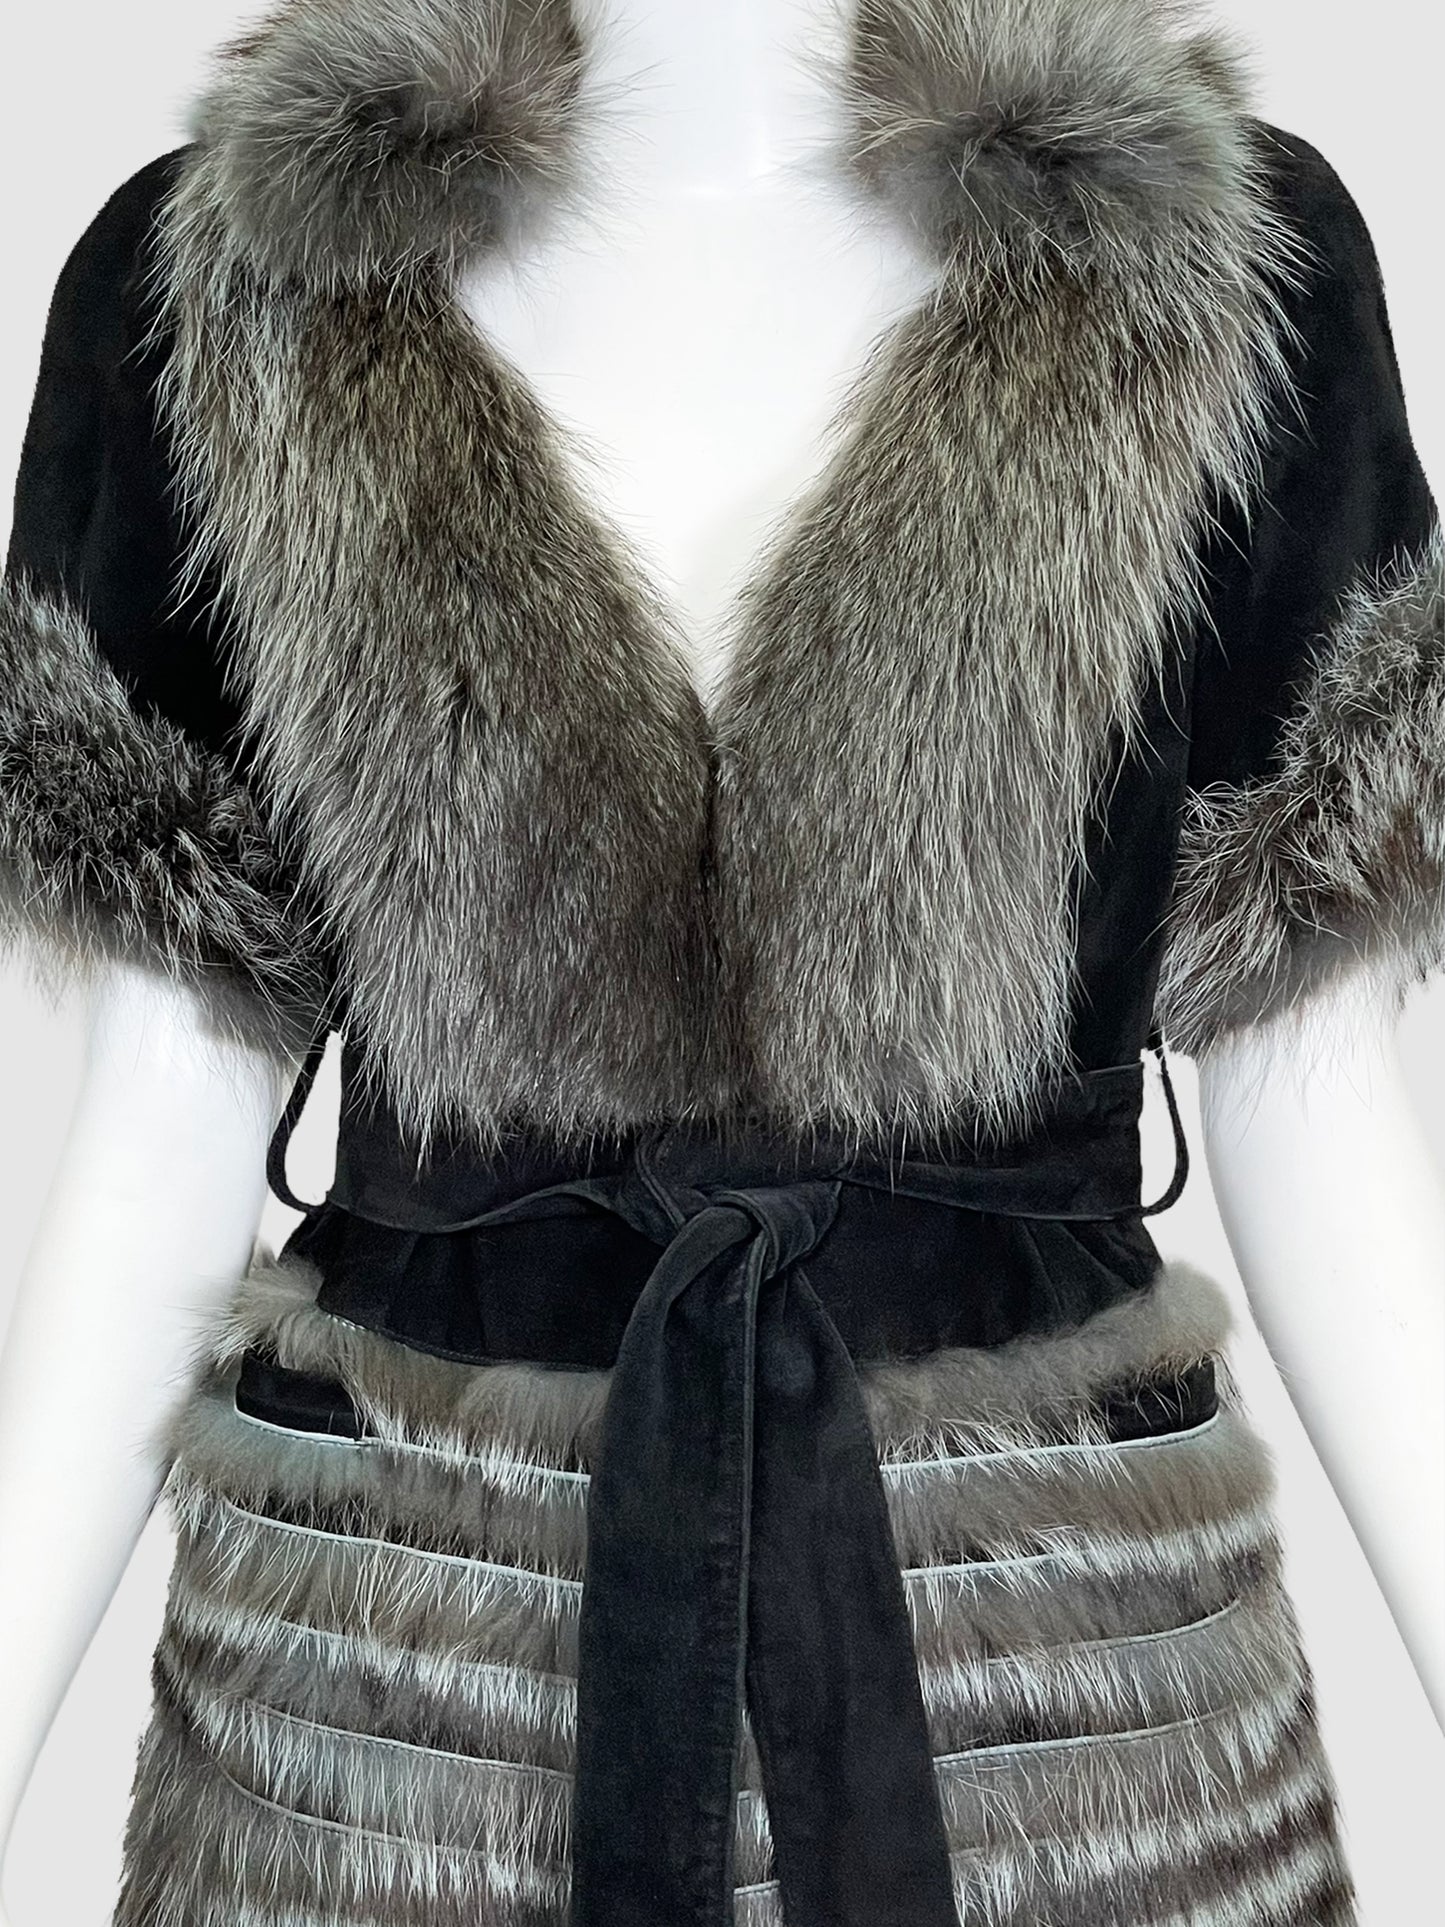 Short-Sleeve Suede and Fur Jacket - Size S